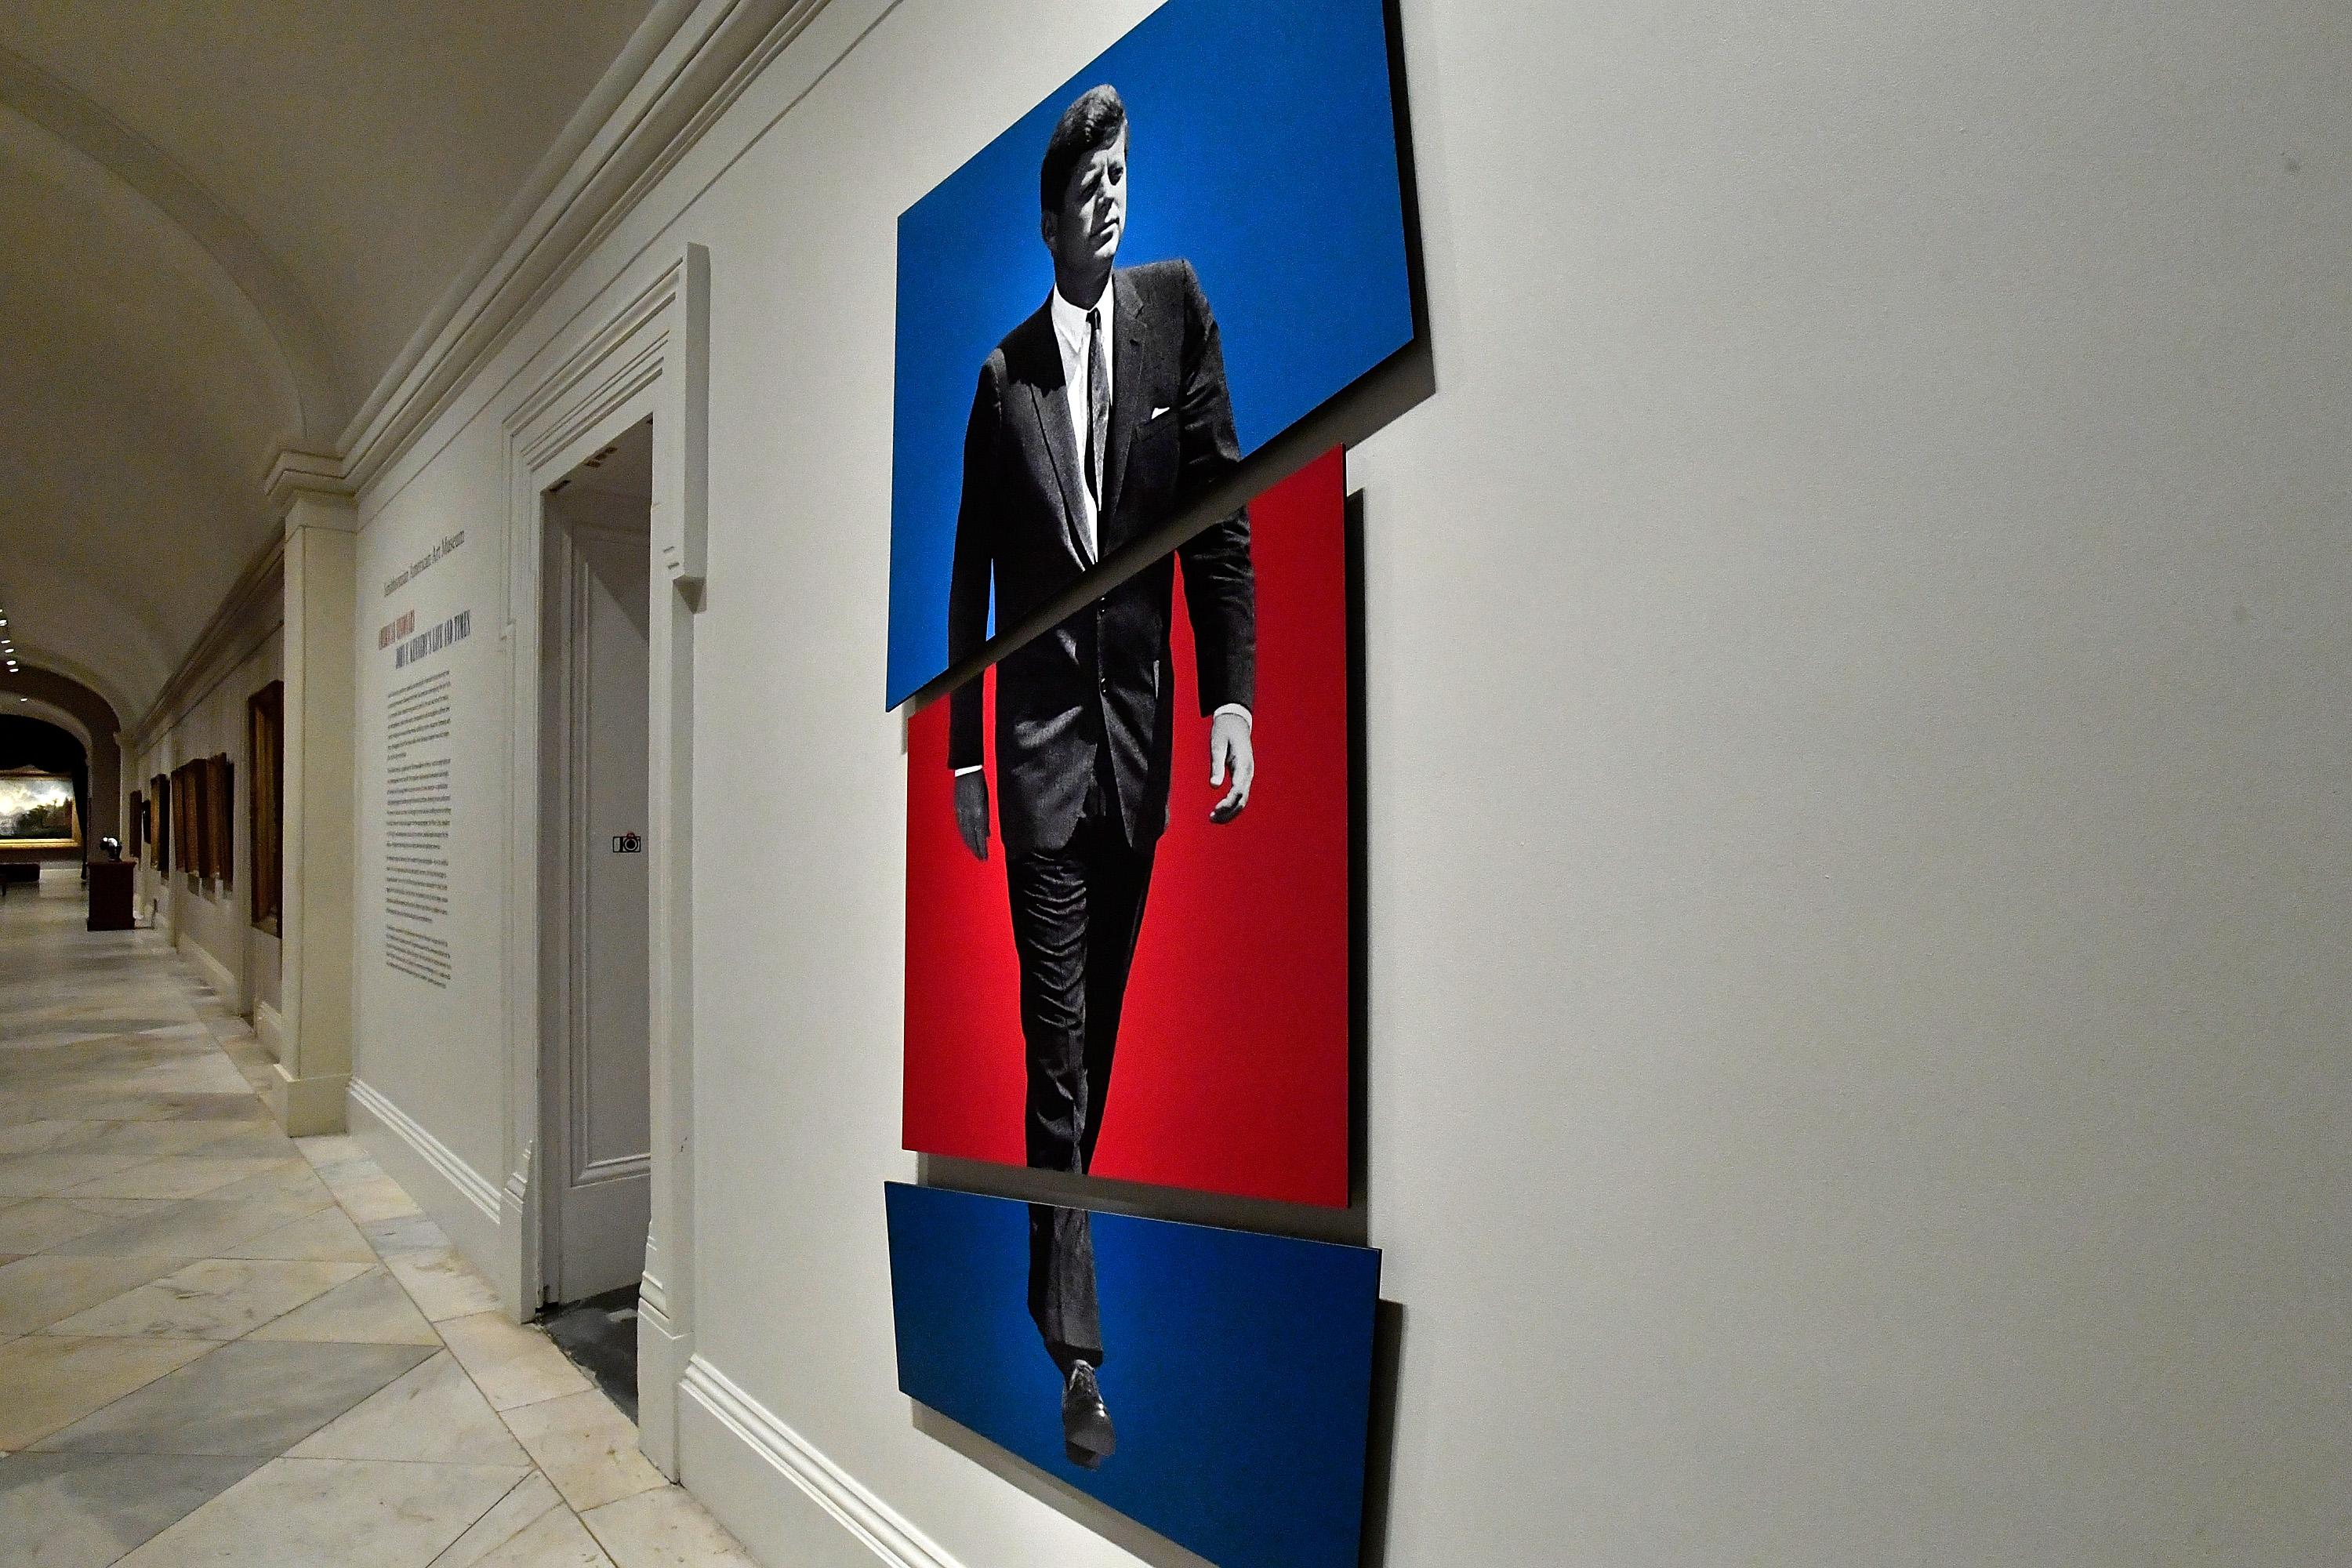 WASHINGTON, DC - MAY 02:  General view of American Visionary: John F. Kennedy's Life and Times exhibition at the Smithsonian American Art Museum & National Portrait Gallery on May 2, 2017 in Washington, DC.  (Photo by Larry French/Getty Images for WS Productions)